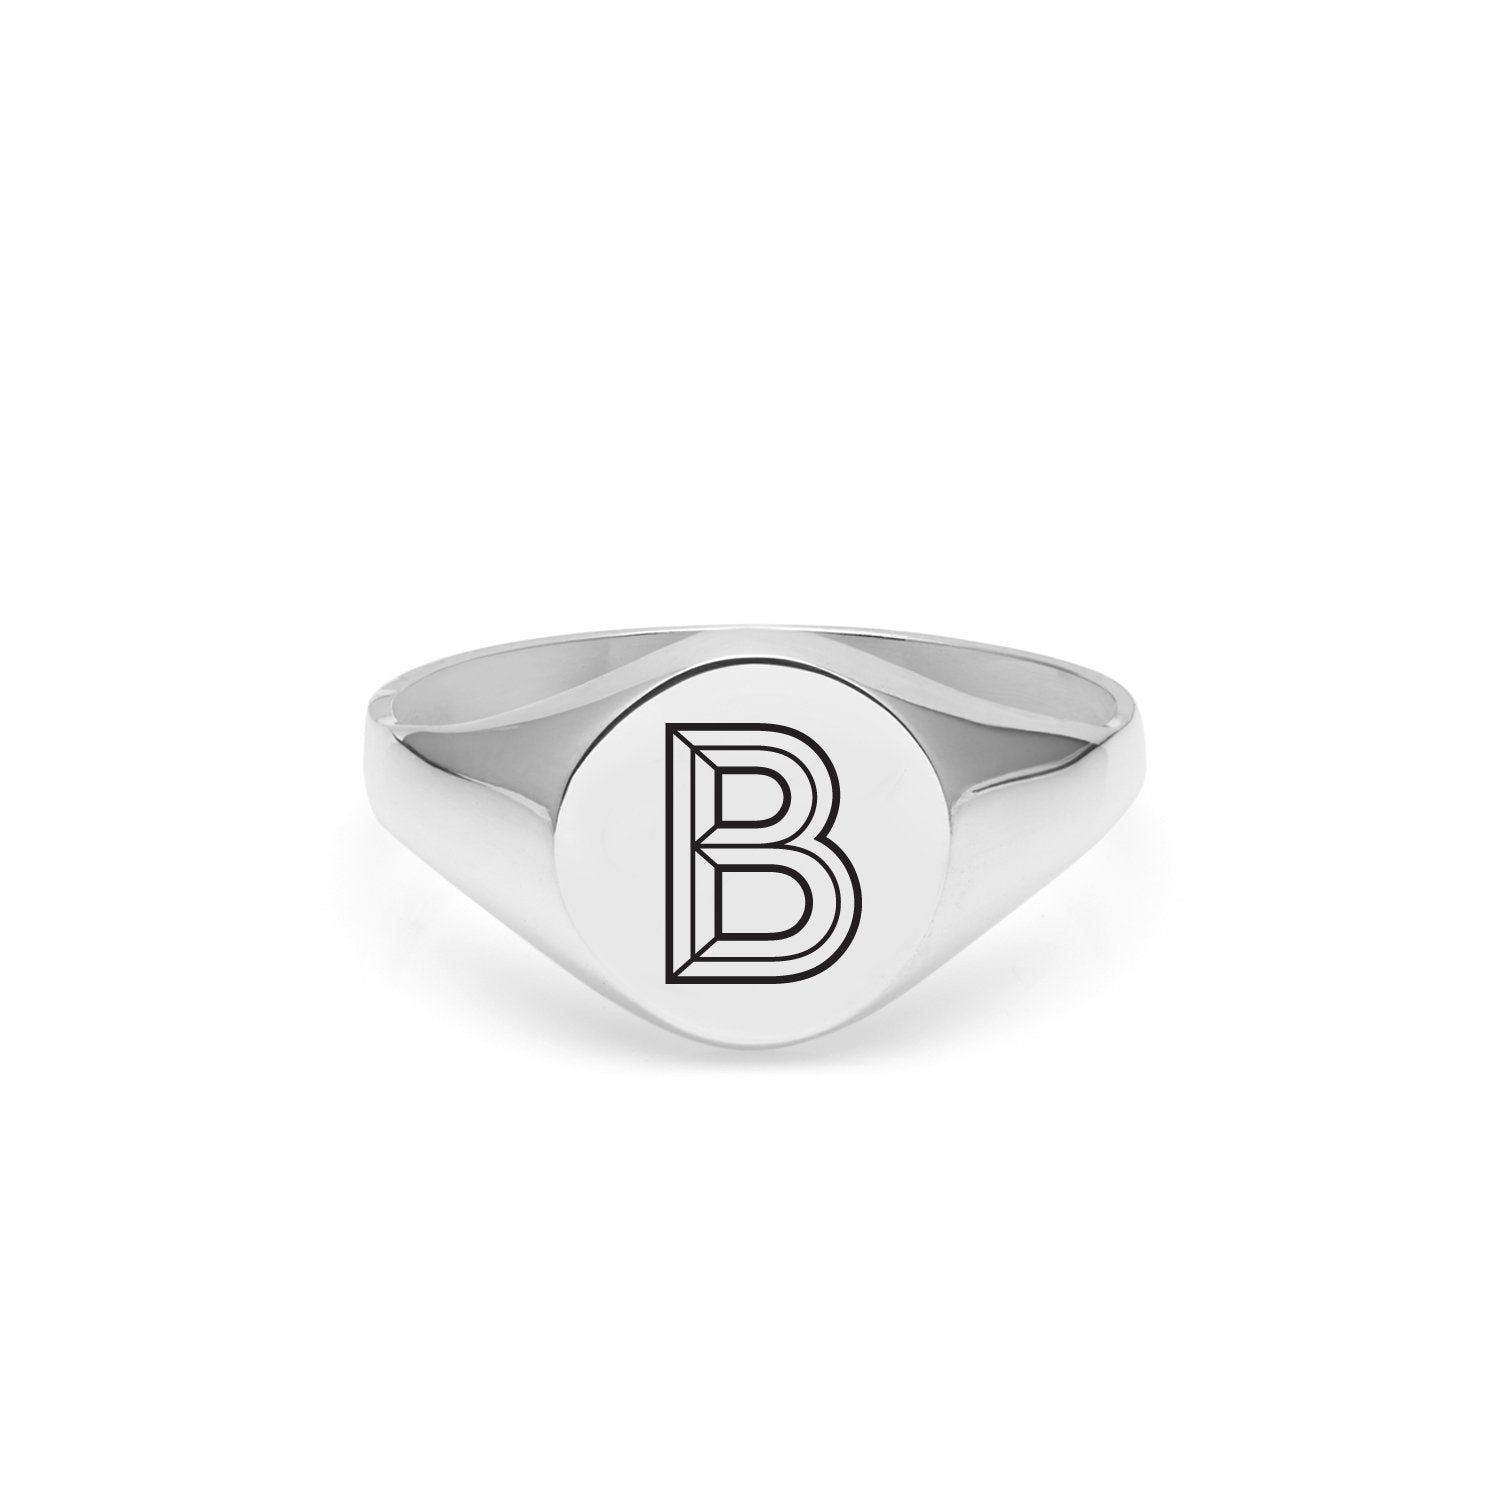 Facett Initial B Round Signet Ring - Silver - Myia Bonner Jewellery